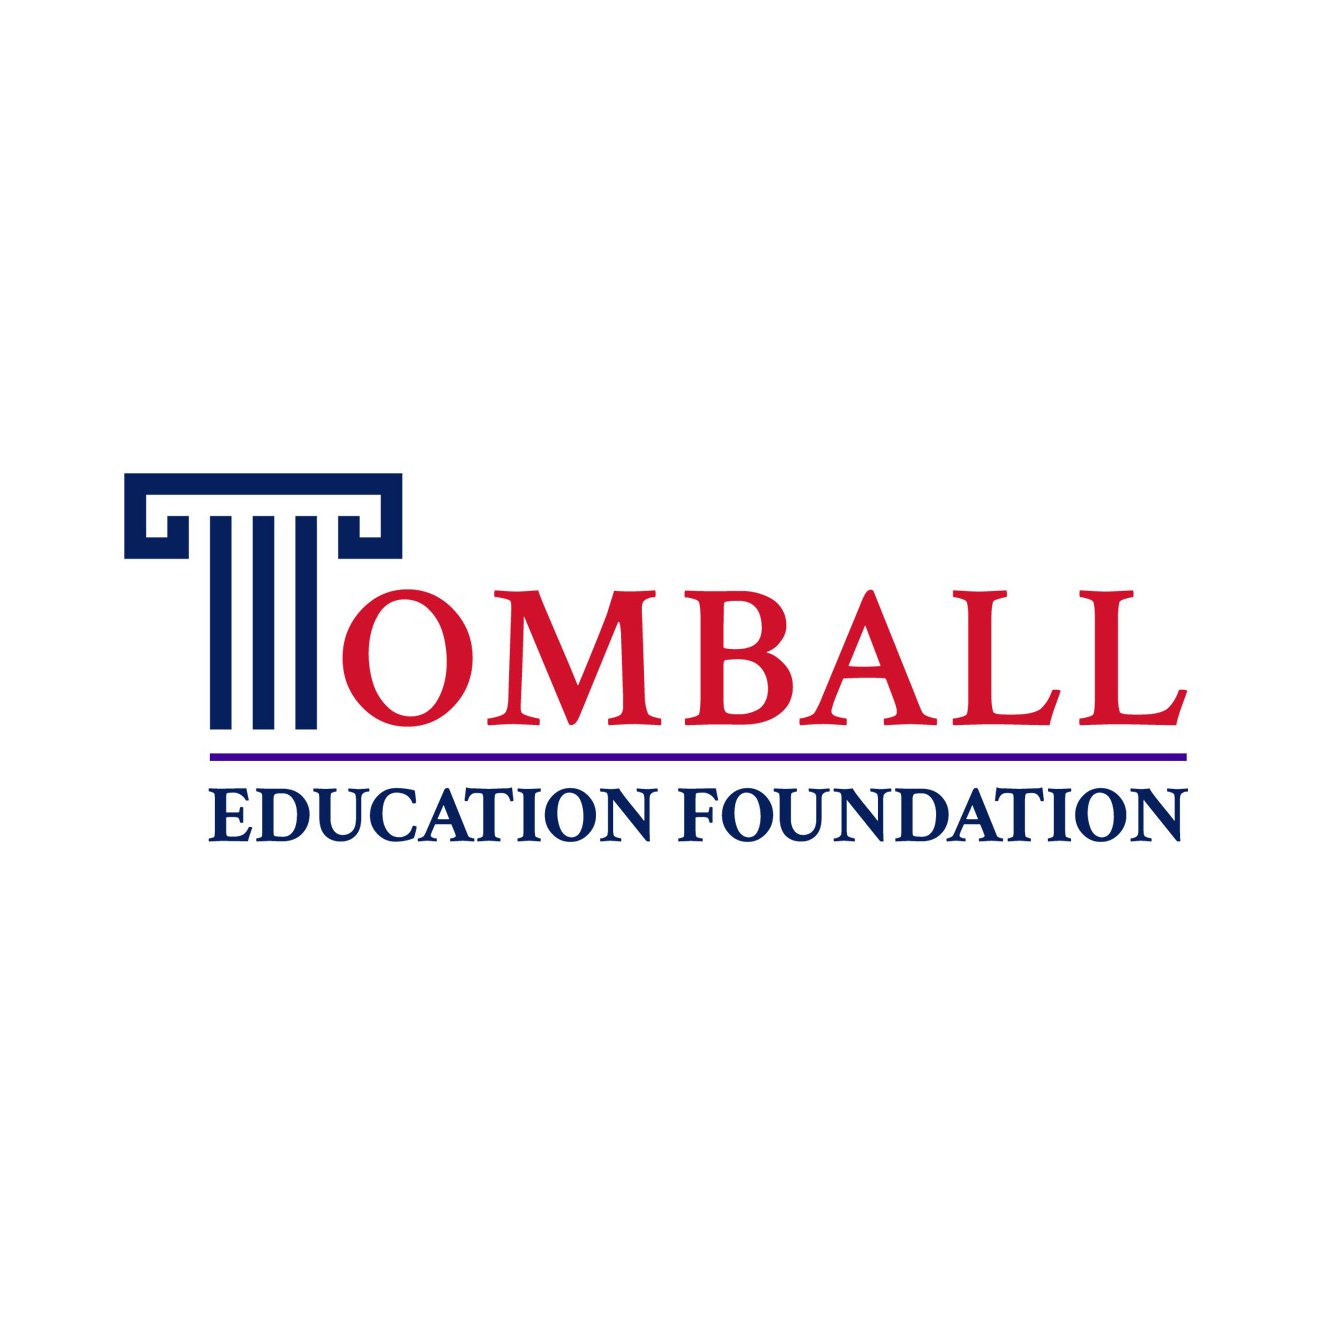 Tomball Education Foundation